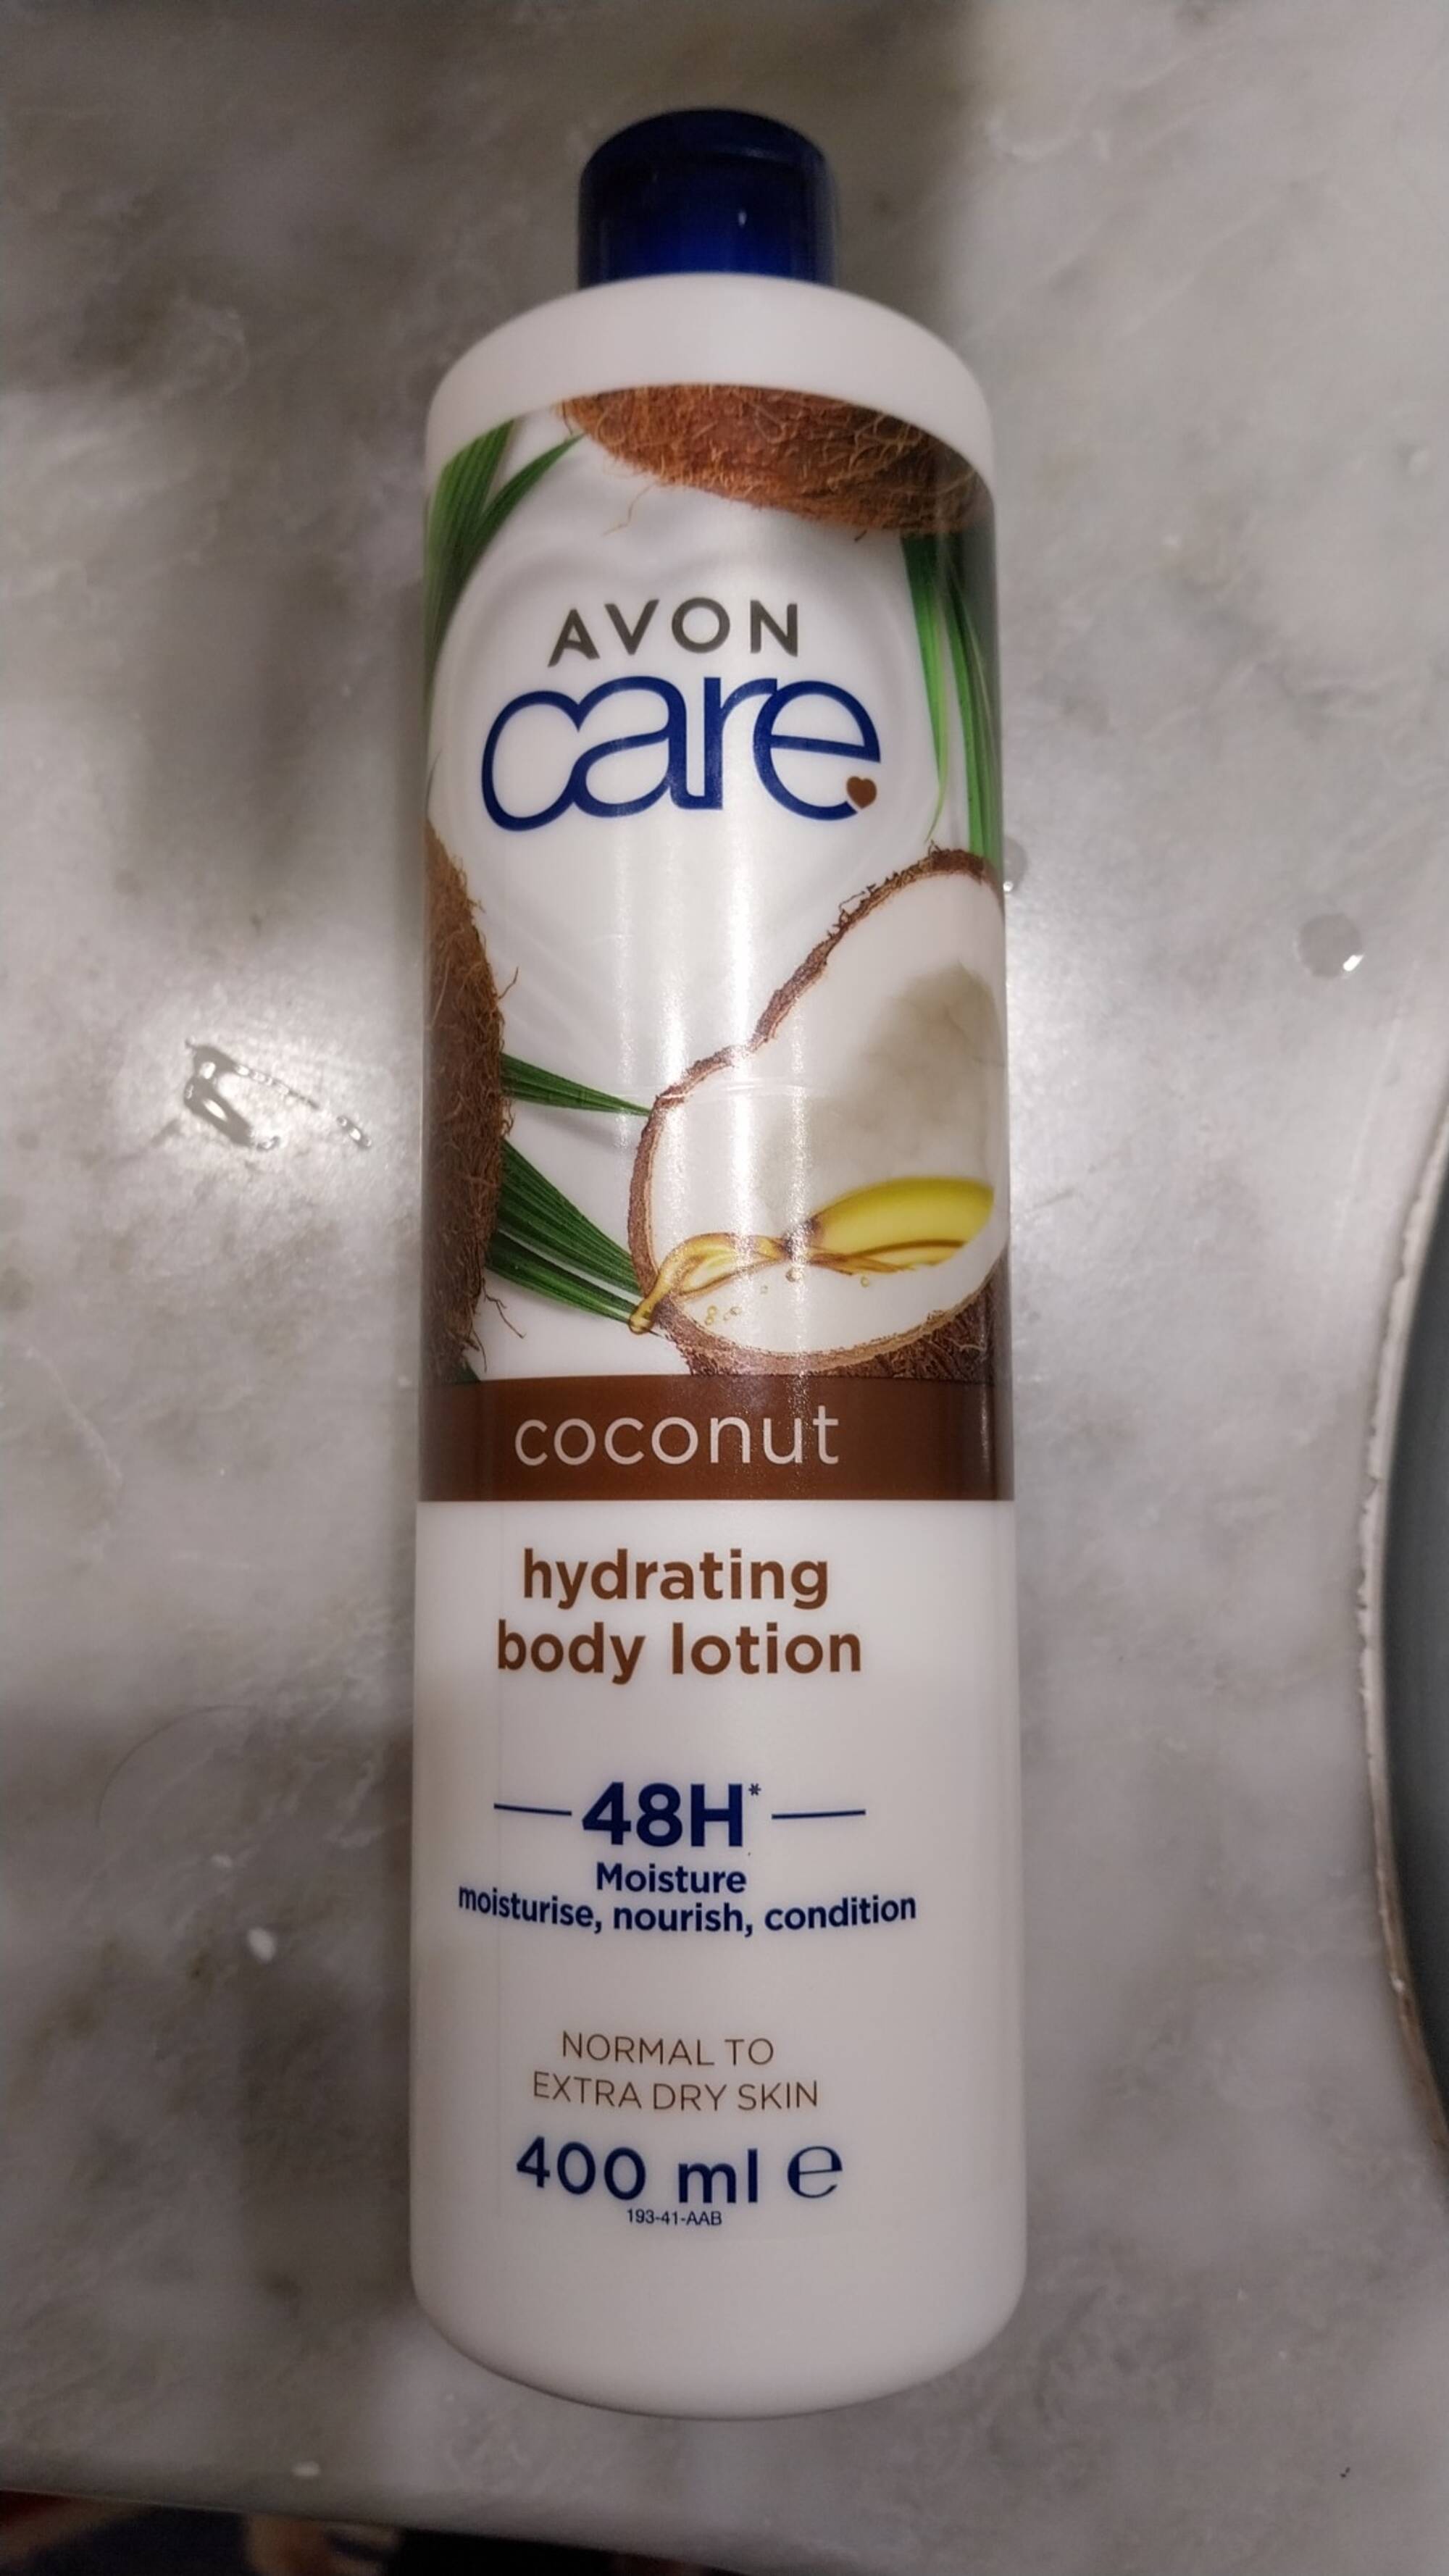 AVON CARE - Coconut - Hydrating body lotion